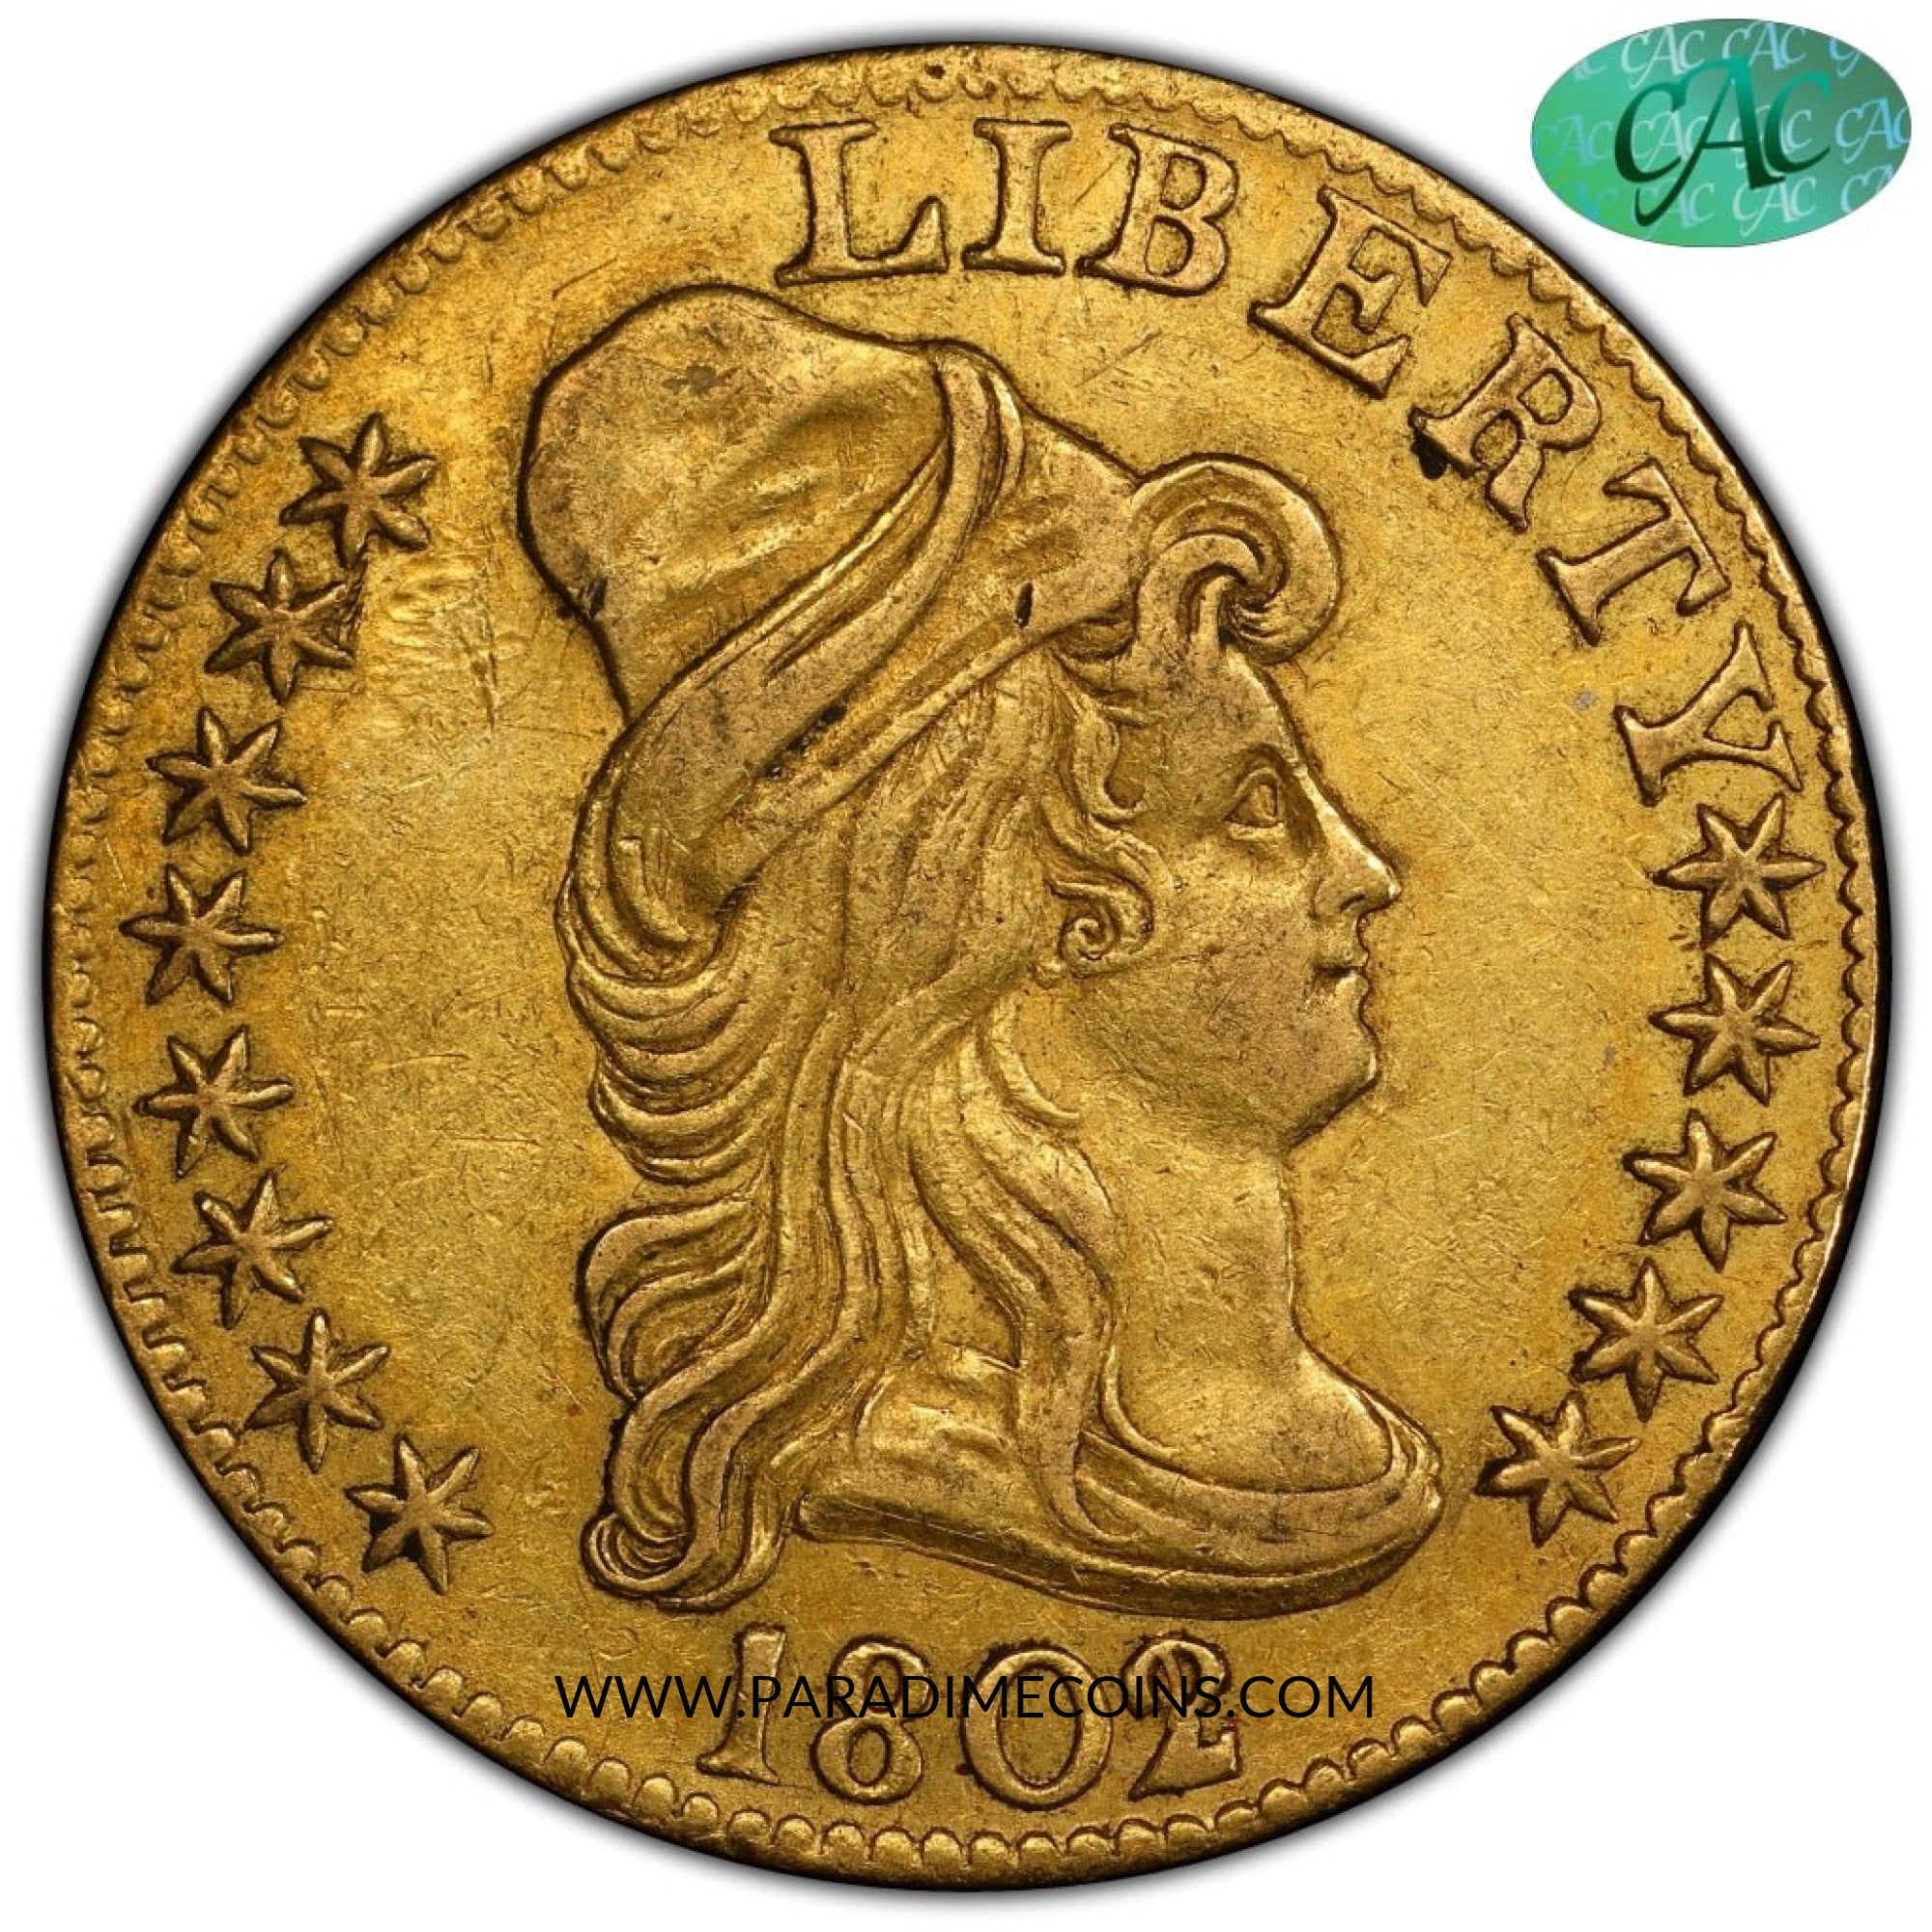 1802/1 $5 XF45 PCGS - Paradime Coins | PCGS NGC CACG CAC Rare US Numismatic Coins For Sale